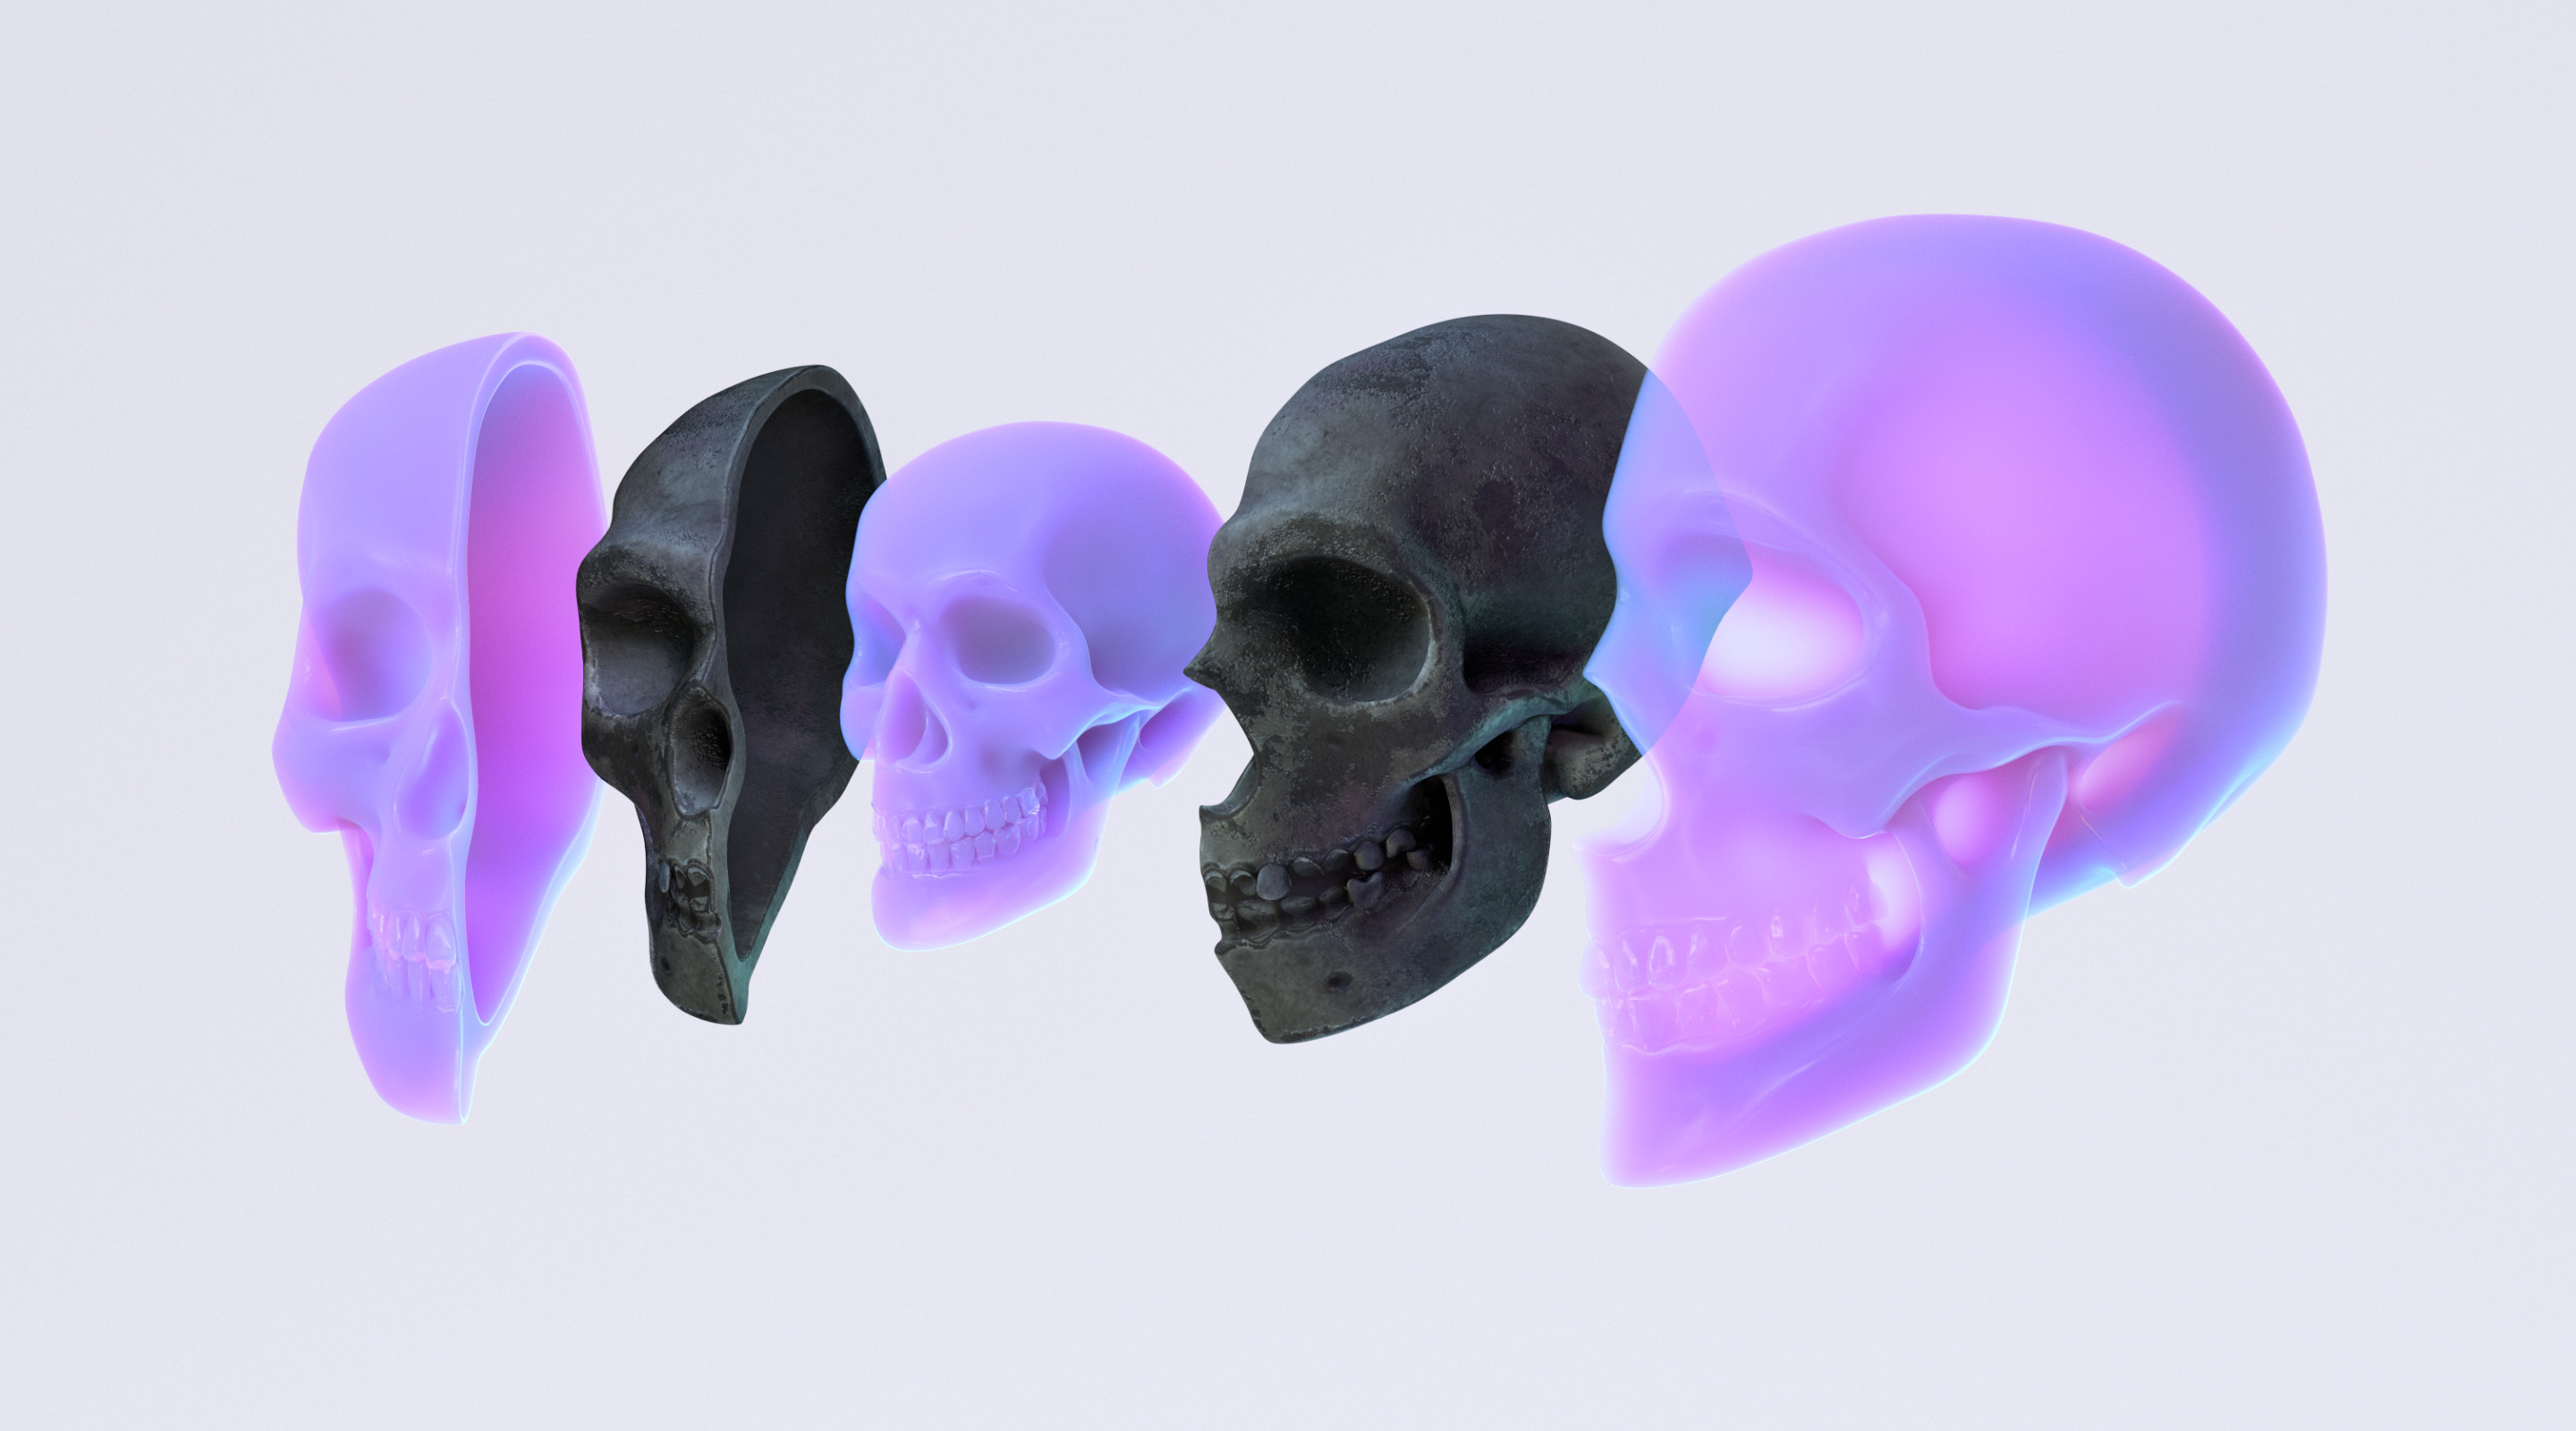 I sculpted modern human and Neanderthal skull shells in ZBrush, then used up my remaining Artistic Licence Credits™ to create highly-stylized, custom materials: one contemporary, one ancient.
